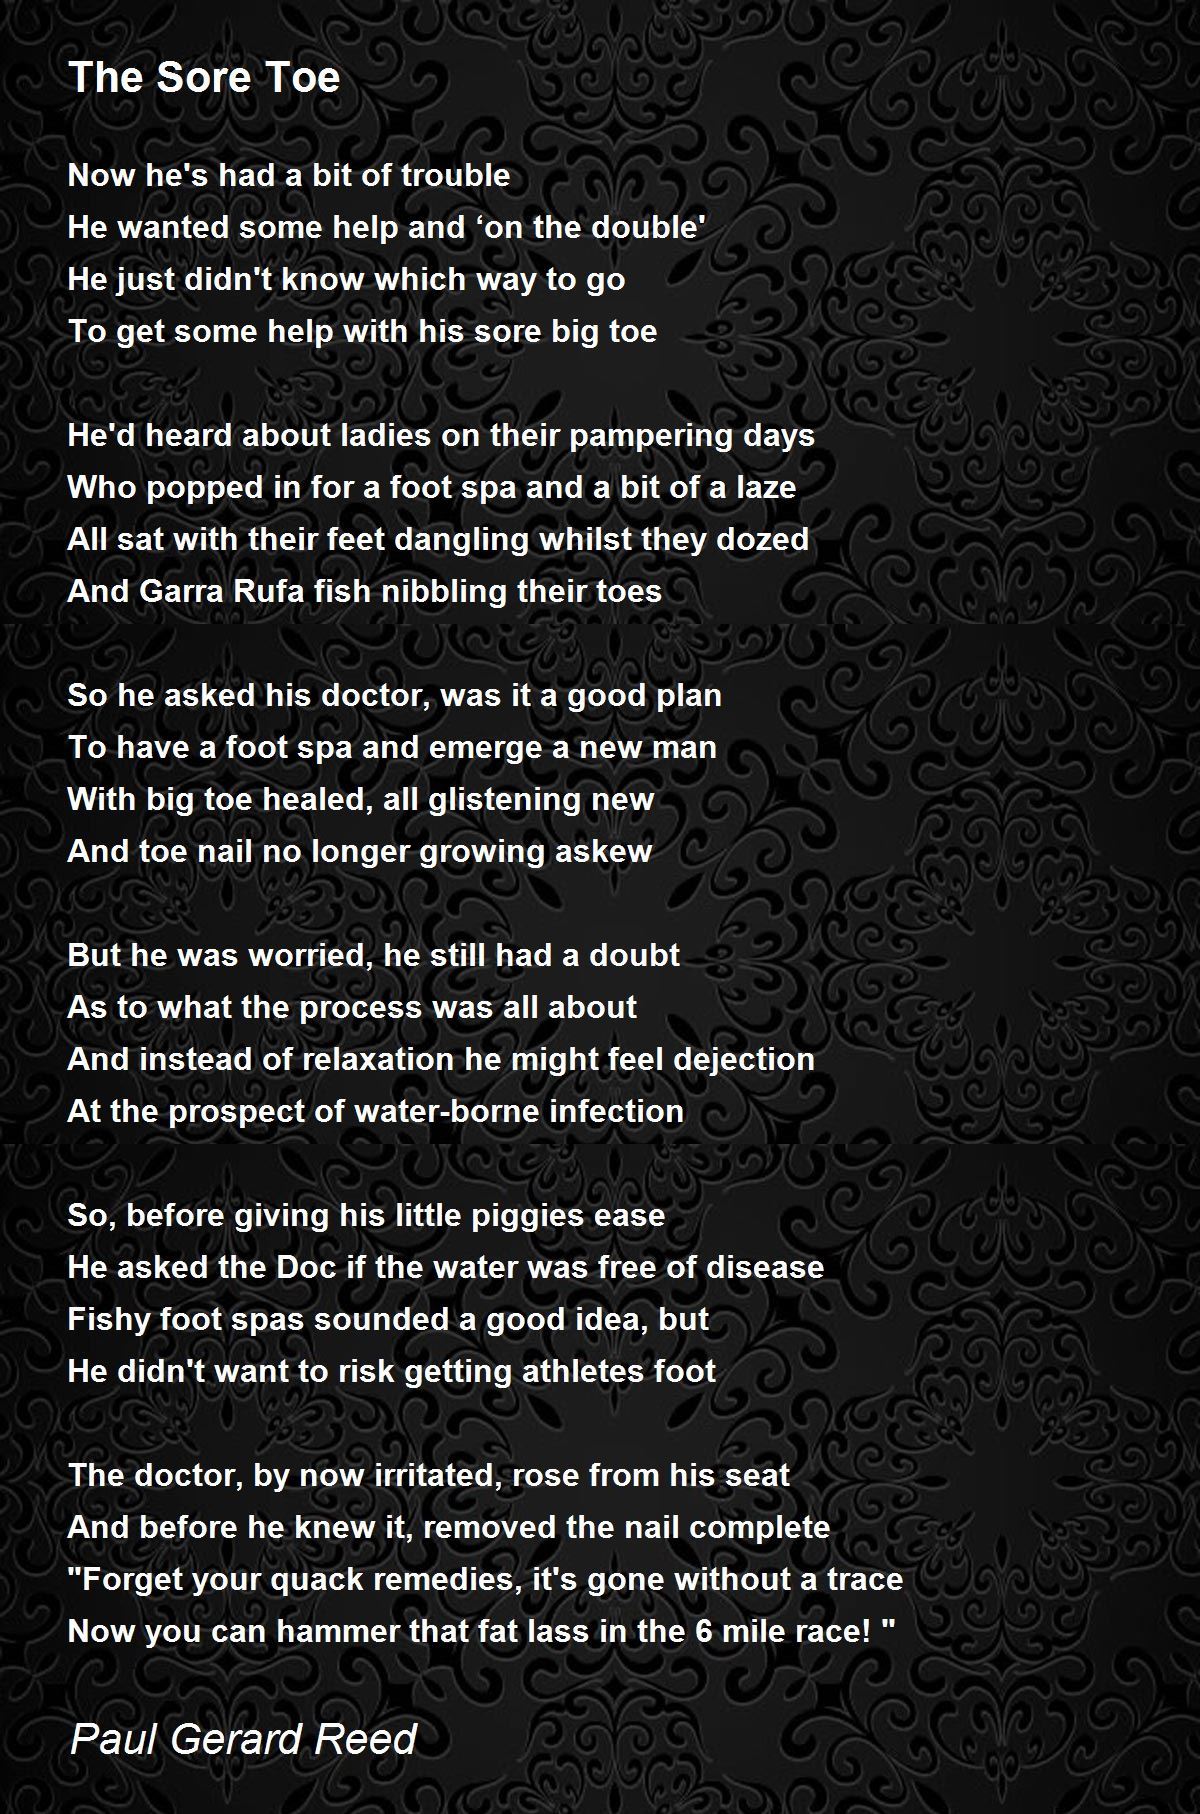 The Sore Toe - The Sore Toe Poem by Paul Reed